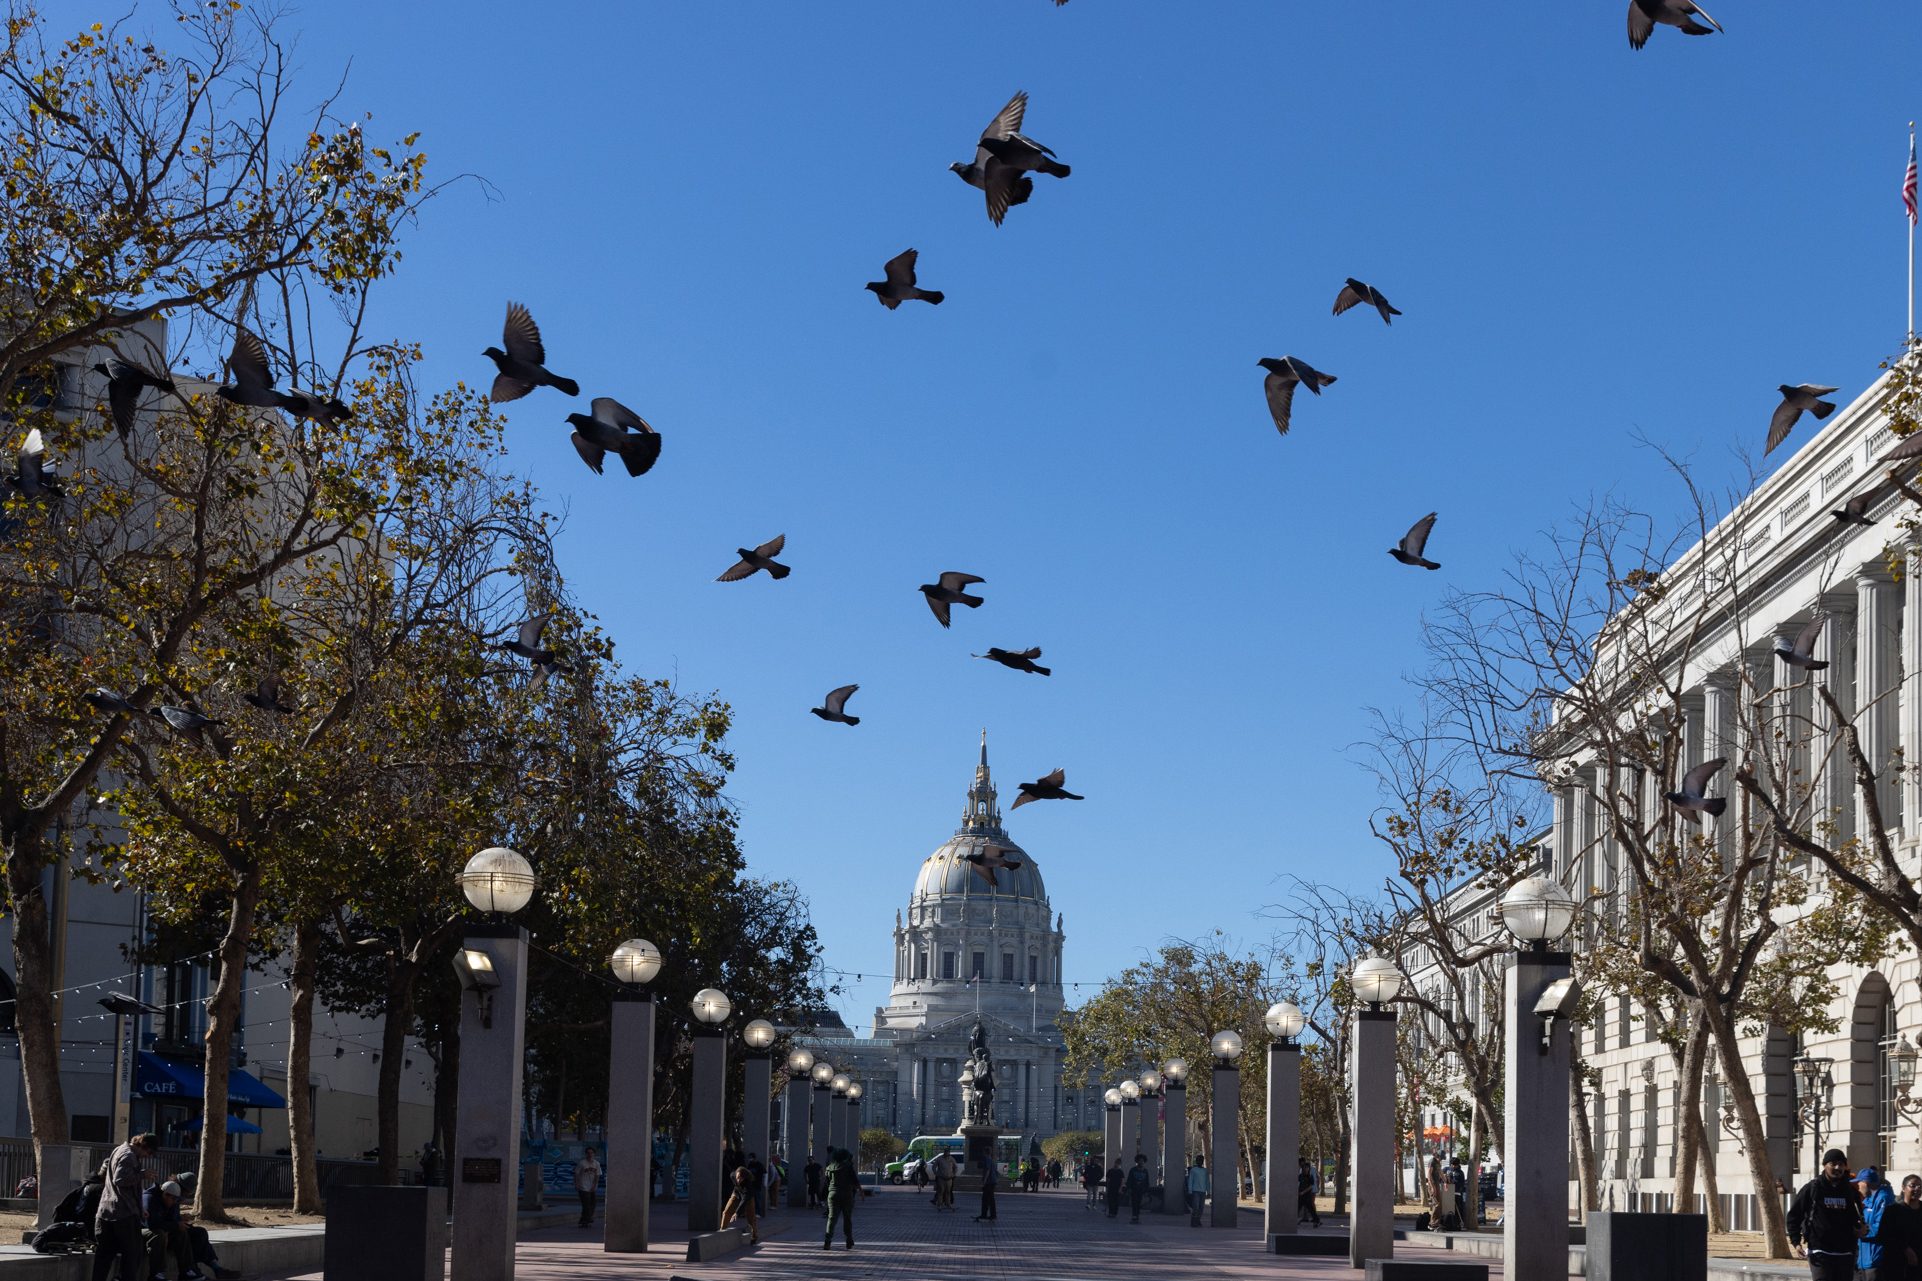 Pigeons in flight over a city plaza with a domed building in the background and people walking below.